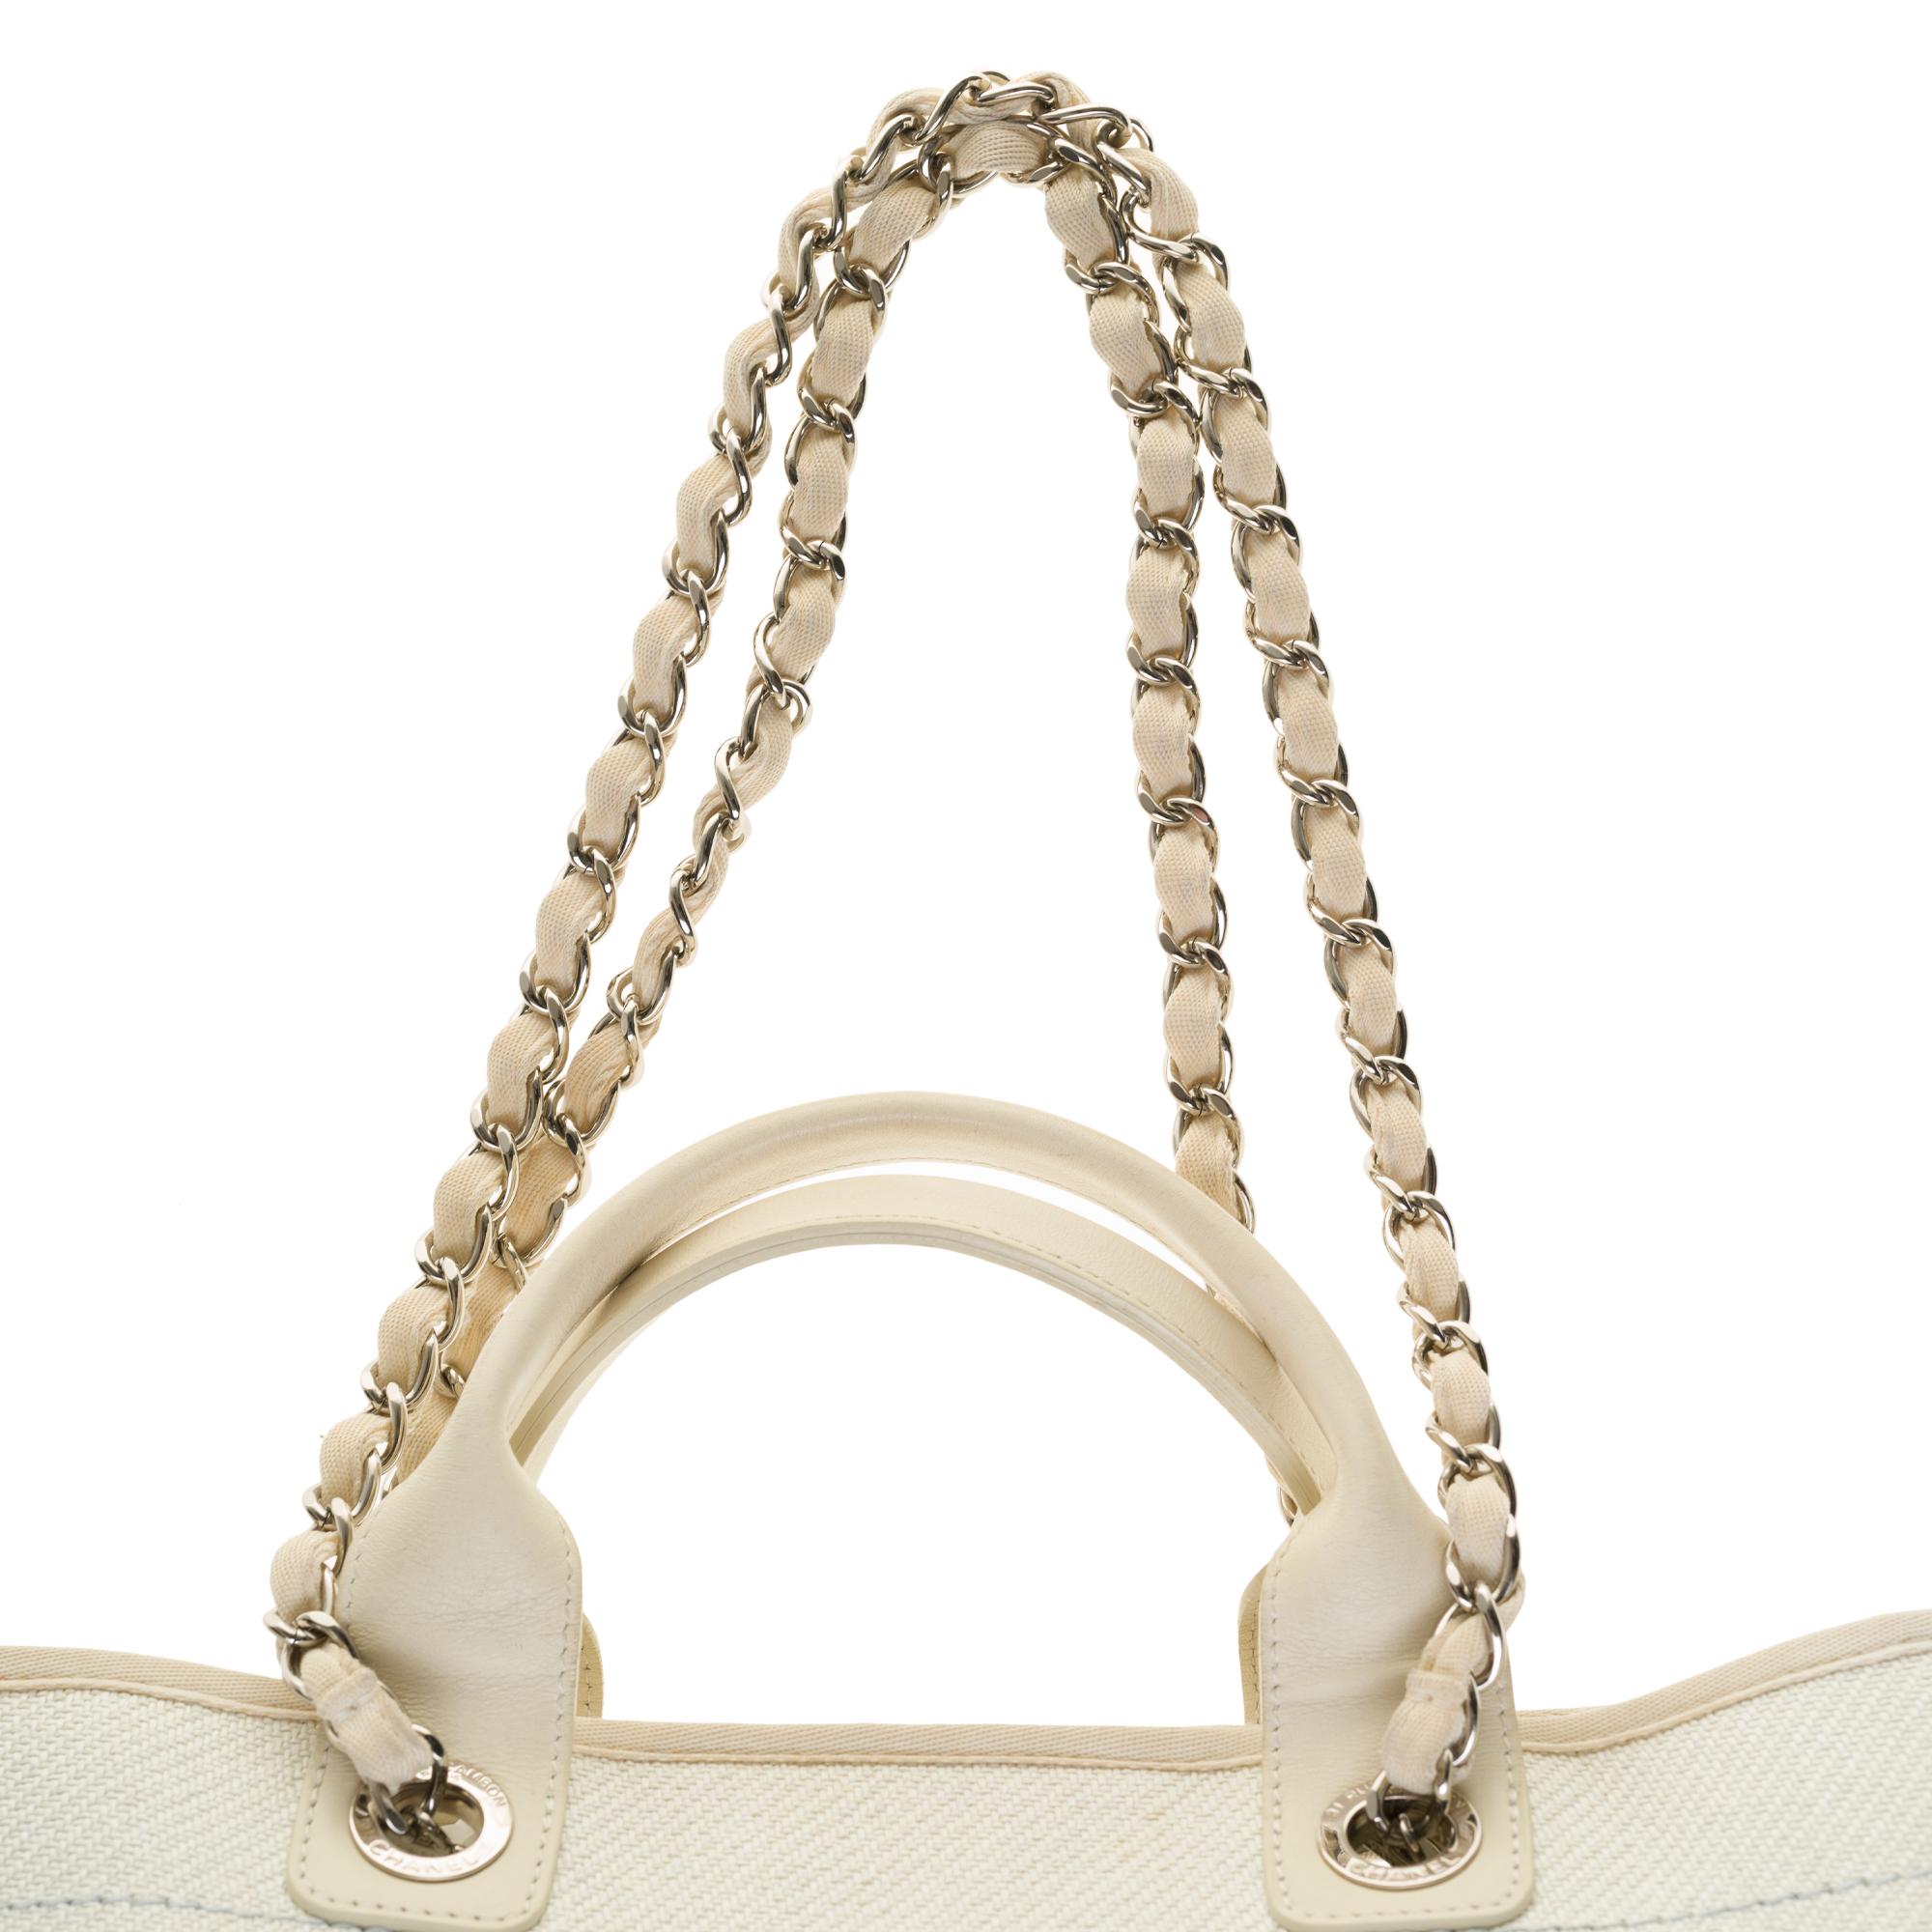 Women's Amazing Chanel Deauville Tote bag in white canvas and leather, silver hardware